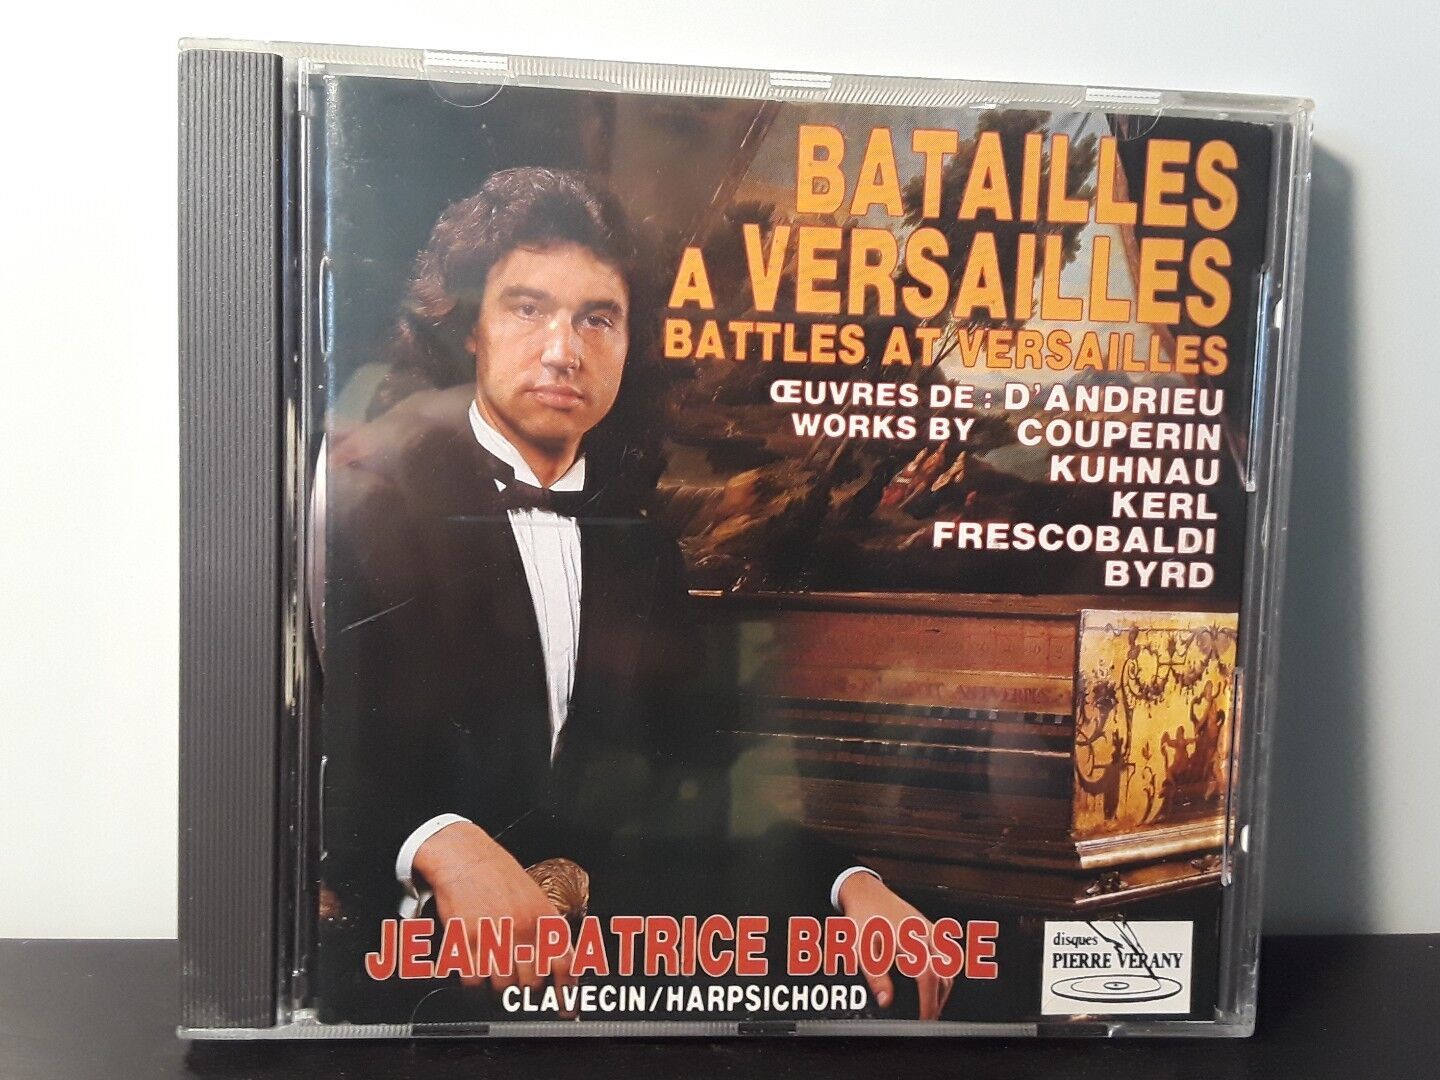 Primary image for Batailles à Versailles - Jean-Patrice Brosse (CD, 1986, Pierre Verany